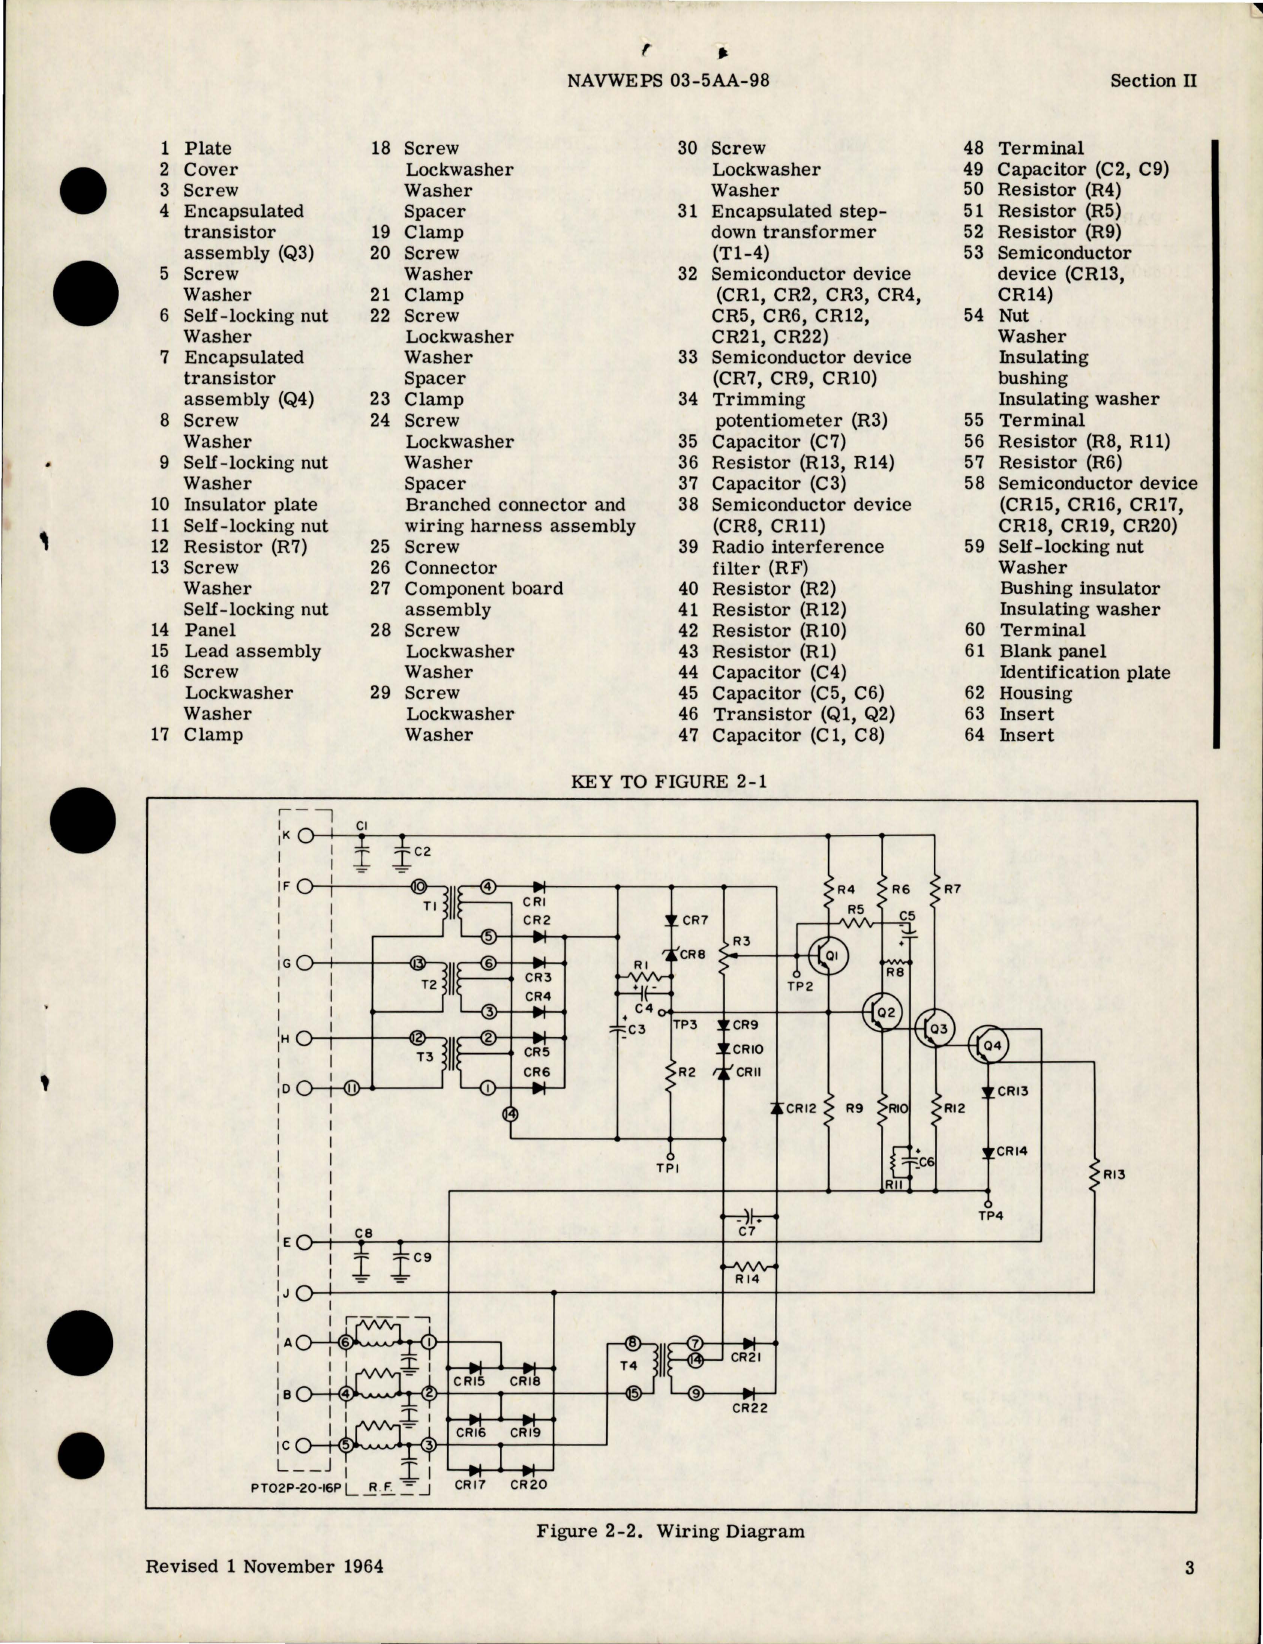 Sample page 5 from AirCorps Library document: Overhaul Instructions for Voltage Regulator - Type 20B56-3-A